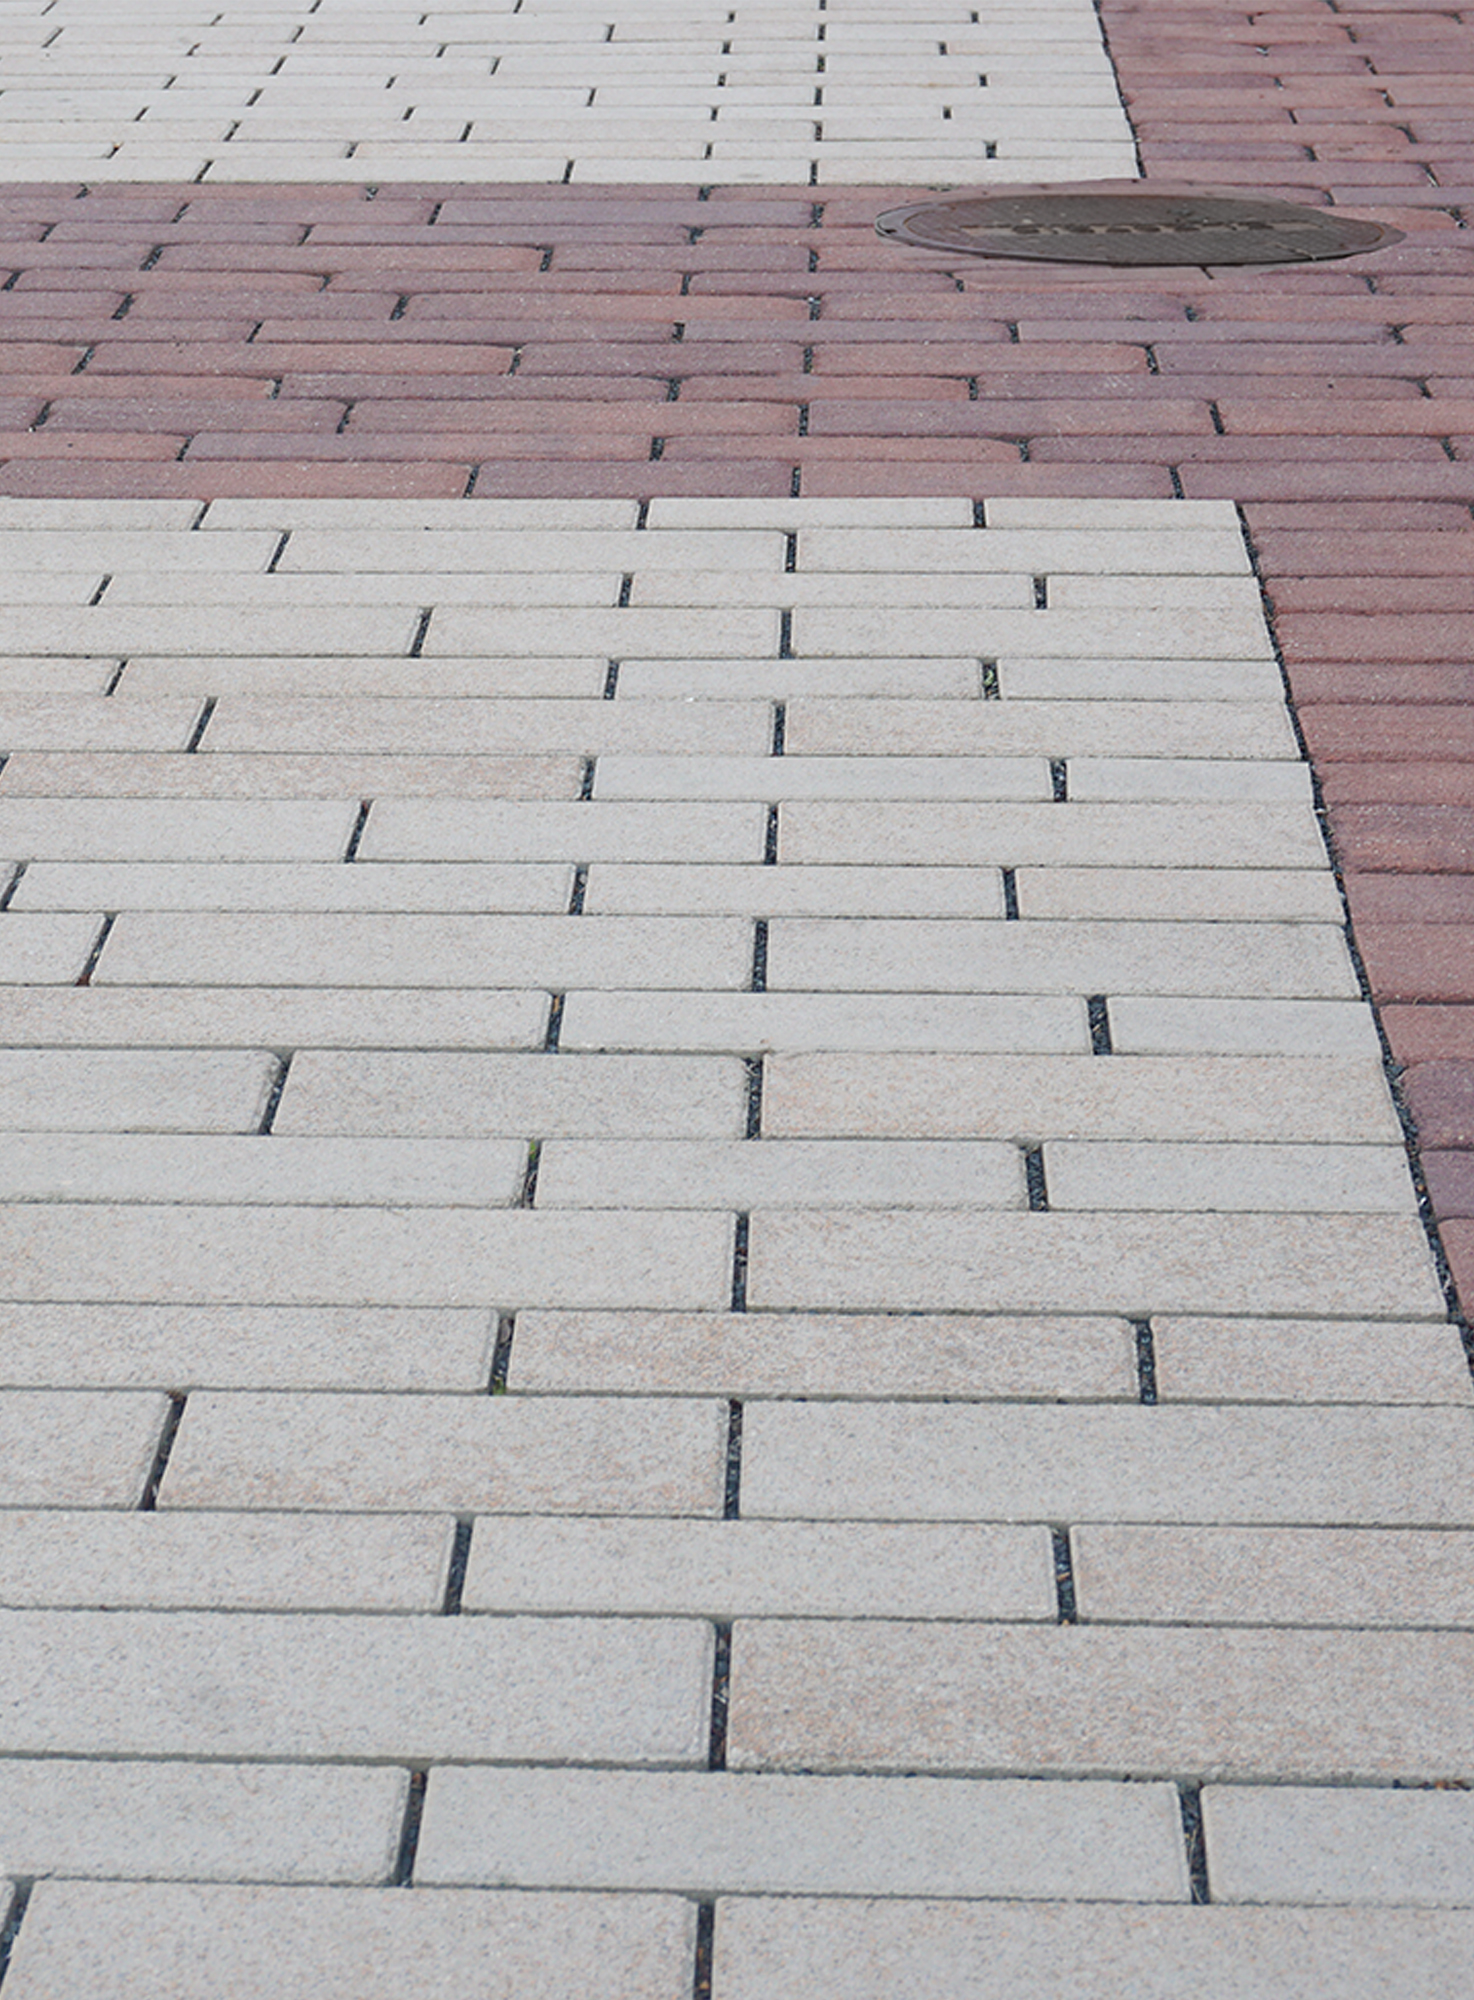 Red and beige Eco-Line pavers are placed in a running bond pattern to create distinct, patterned paver rugs.